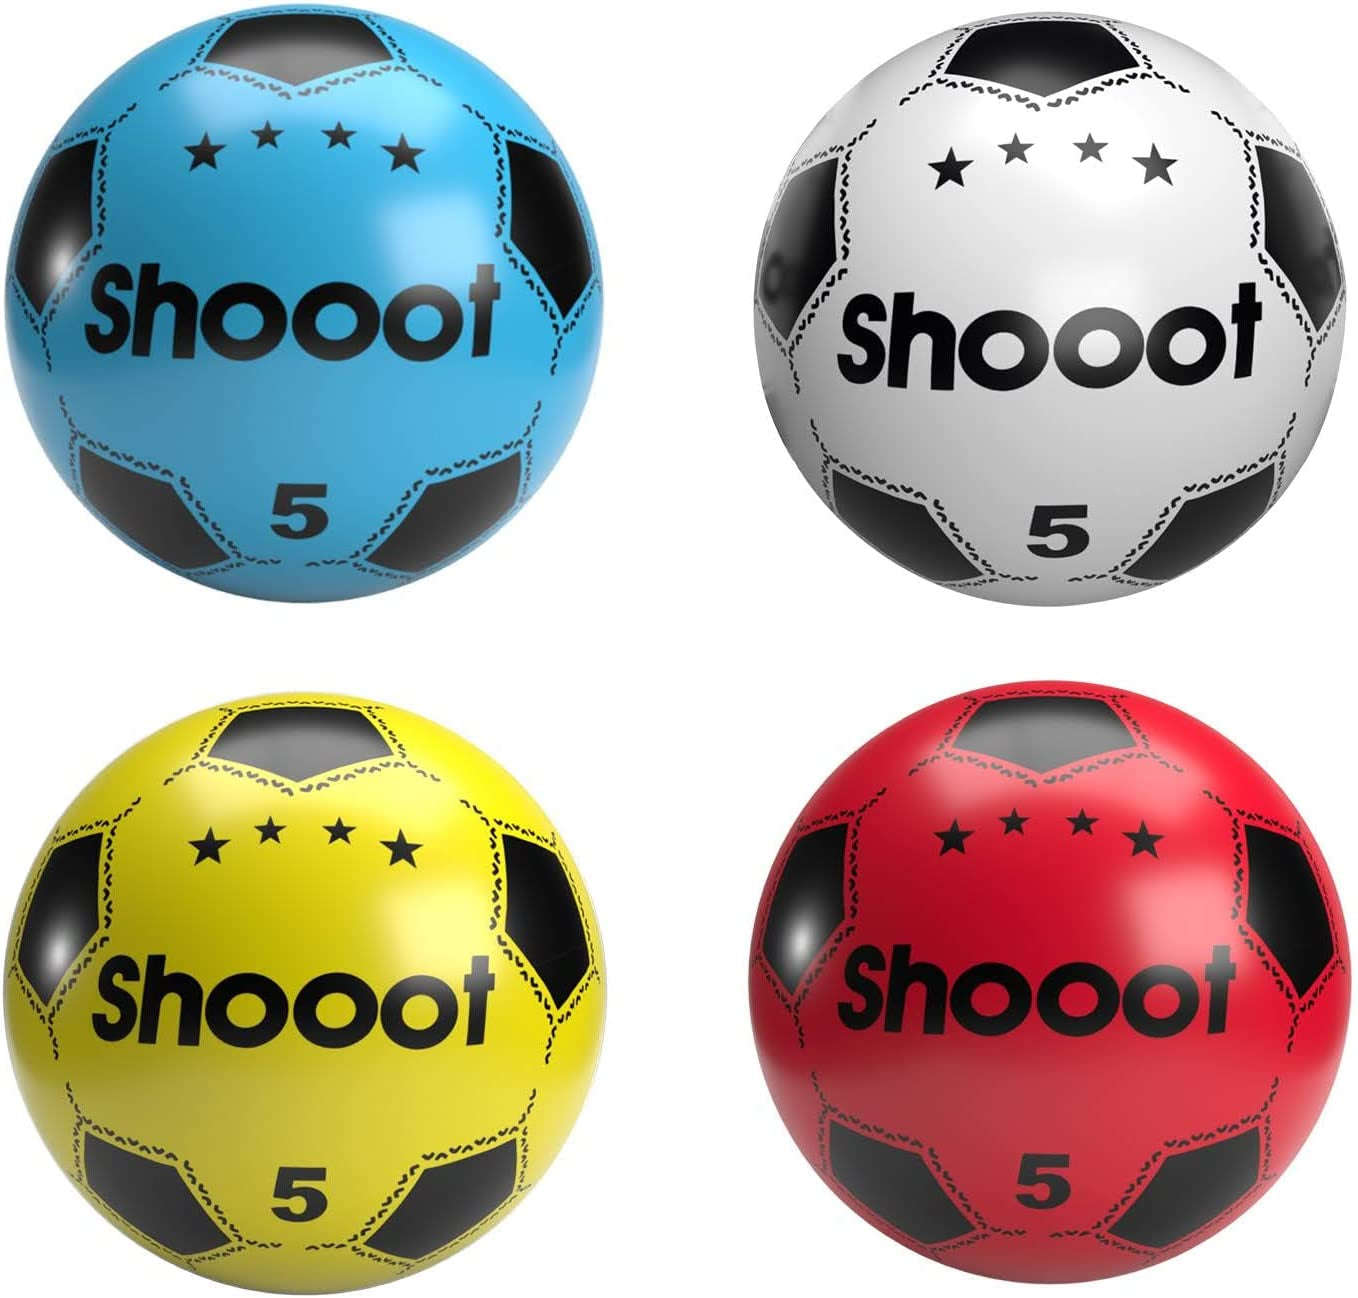 Soccer Shoot PVC Football (Pack of 6) Toy Ball for Kids (Deflated) Lightweight Adjustable Inflatable for Indoor Outdoor Play Beach, Home, Birthday, School & Parties Assorted Colors